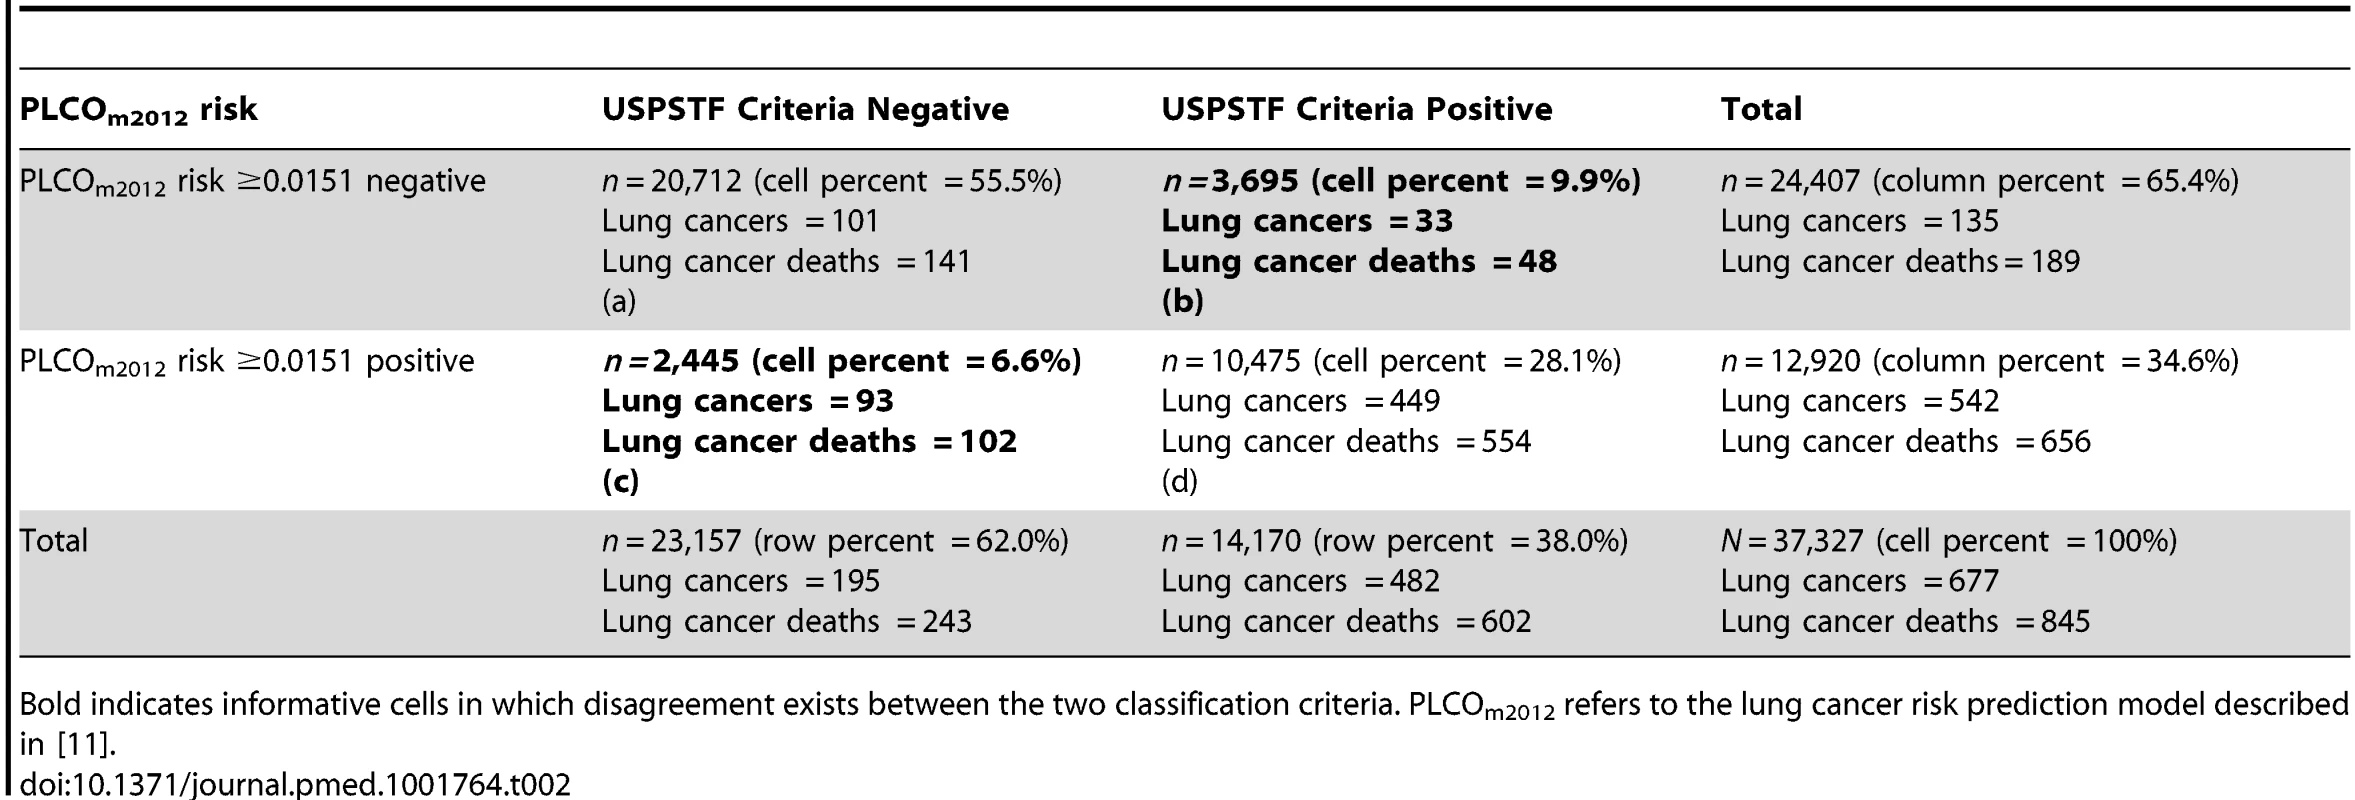 Distribution of observations and lung cancer events by USPSTF criteria and PLCO<sub>m2012</sub> risk ≥0.0151 criterion status in PLCO intervention arm smokers.